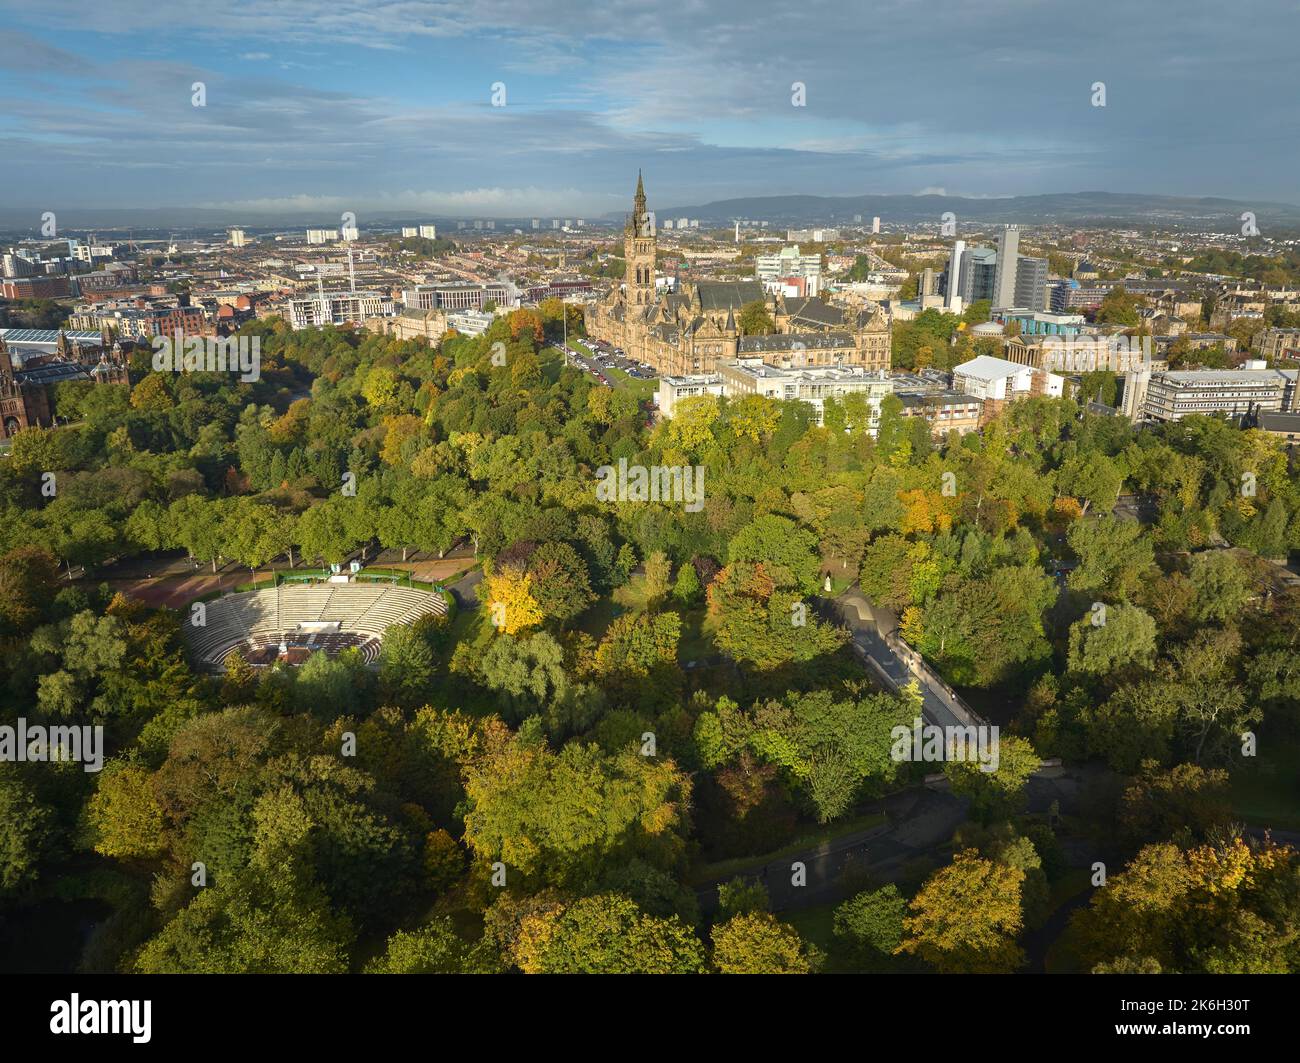 Aerial view of University of Glasgow with the Bandstand in Kelvingrove Park in the foreground. Stock Photo